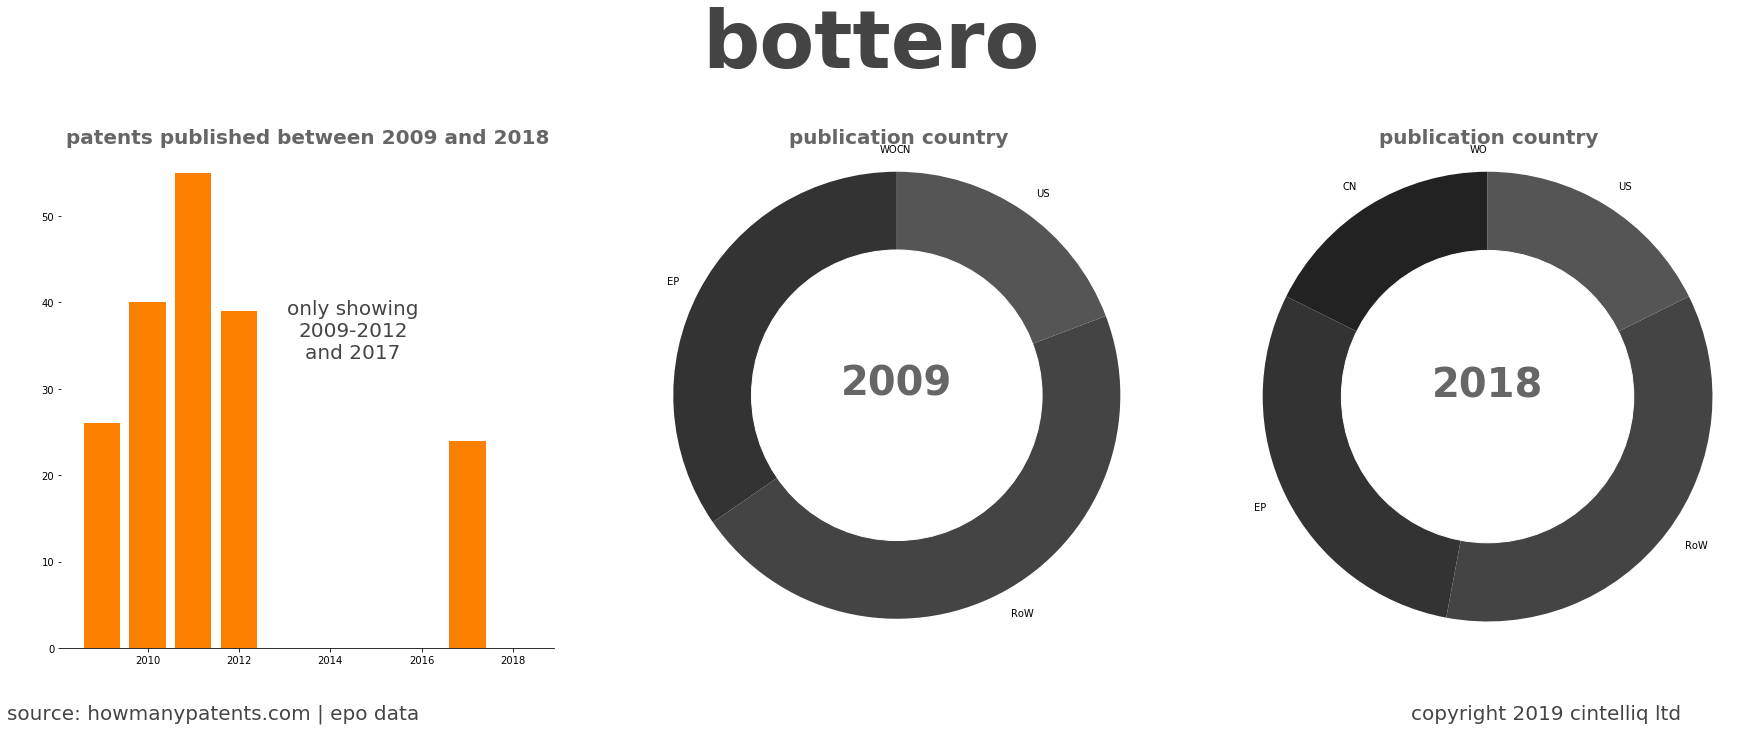 summary of patents for Bottero